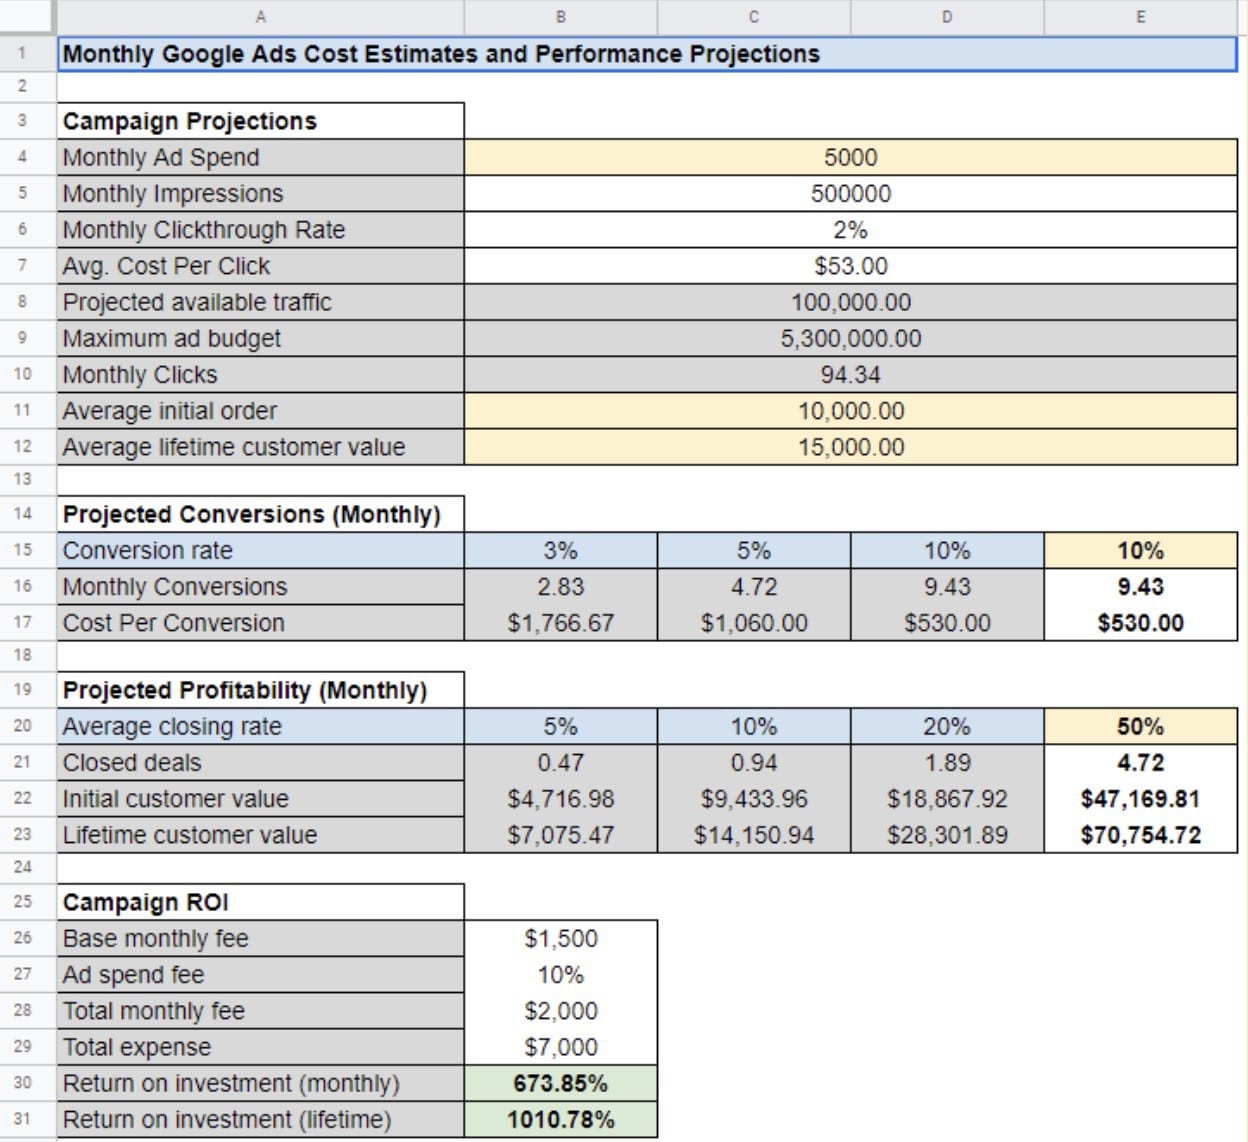 Spreadsheet calculating Google Ad costs and performance to measure the campaign ROI